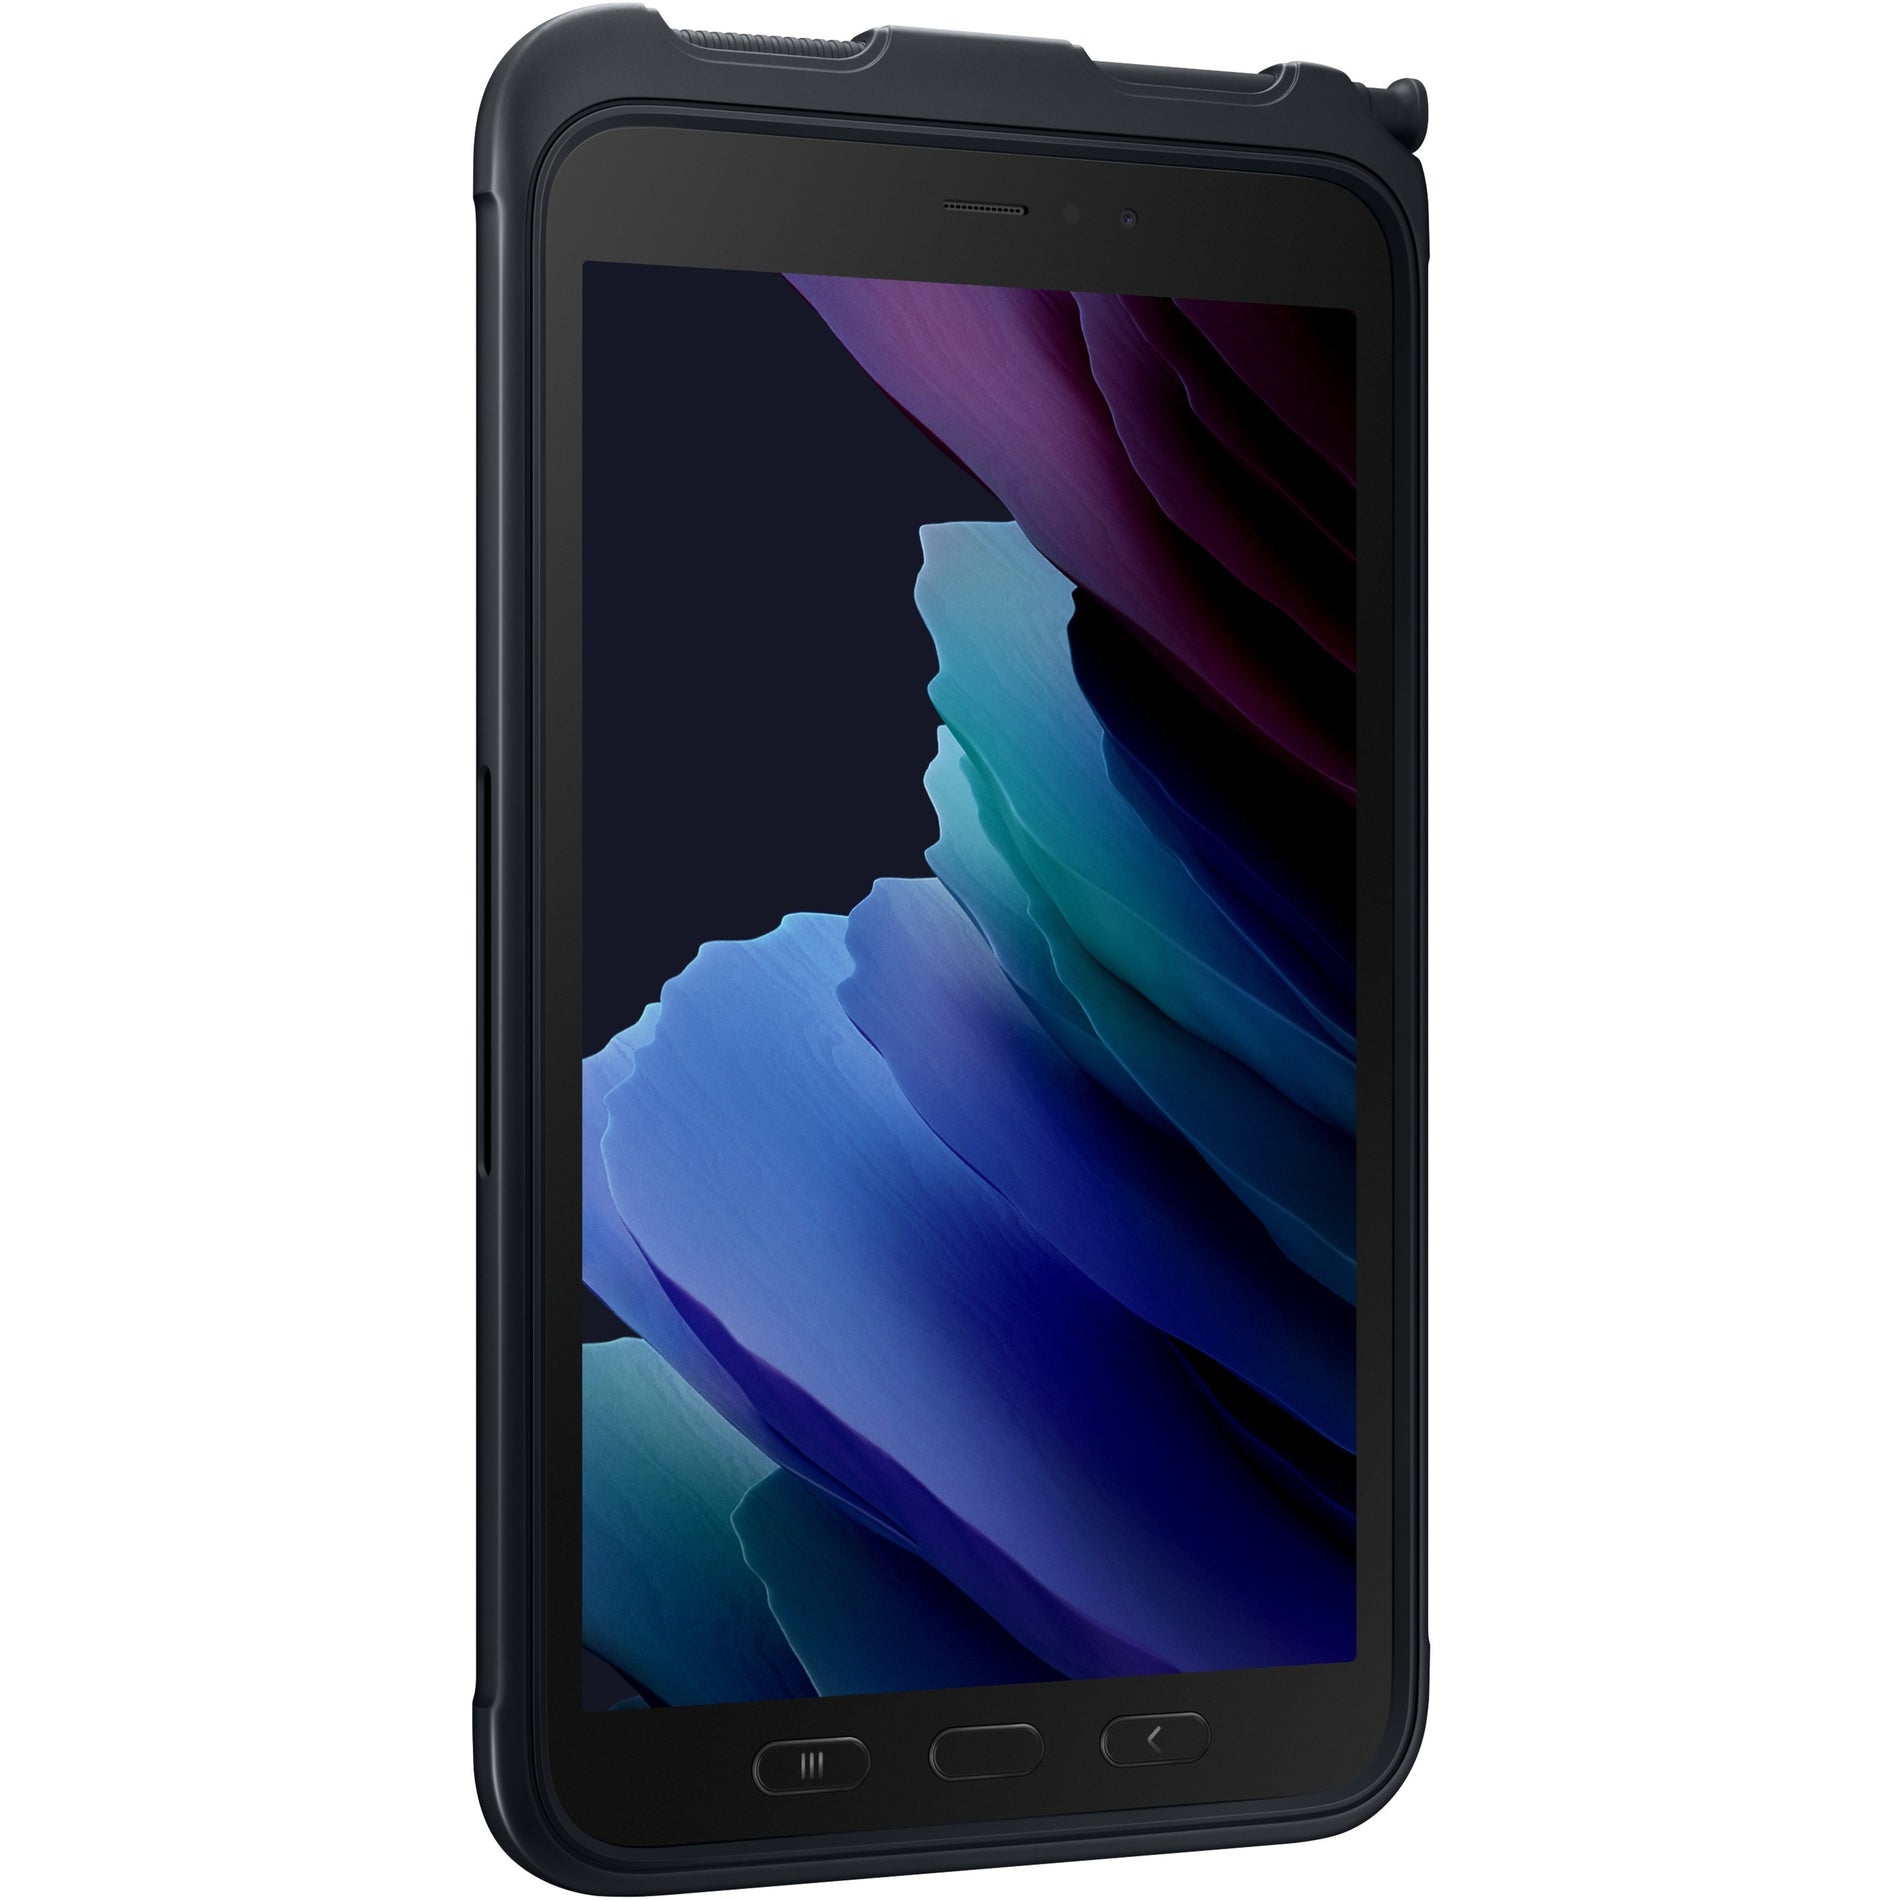 Samsung Galaxy Tab Active3 Rugged Tablet - 8" WUXGA - Octa-core (8 Core) 2.70 GHz 1.70 GHz - 4 GB RAM - 128 GB Storage - Android 10 - 4G - Black (SM-T577UZKGN14) Alternate-Image5 image